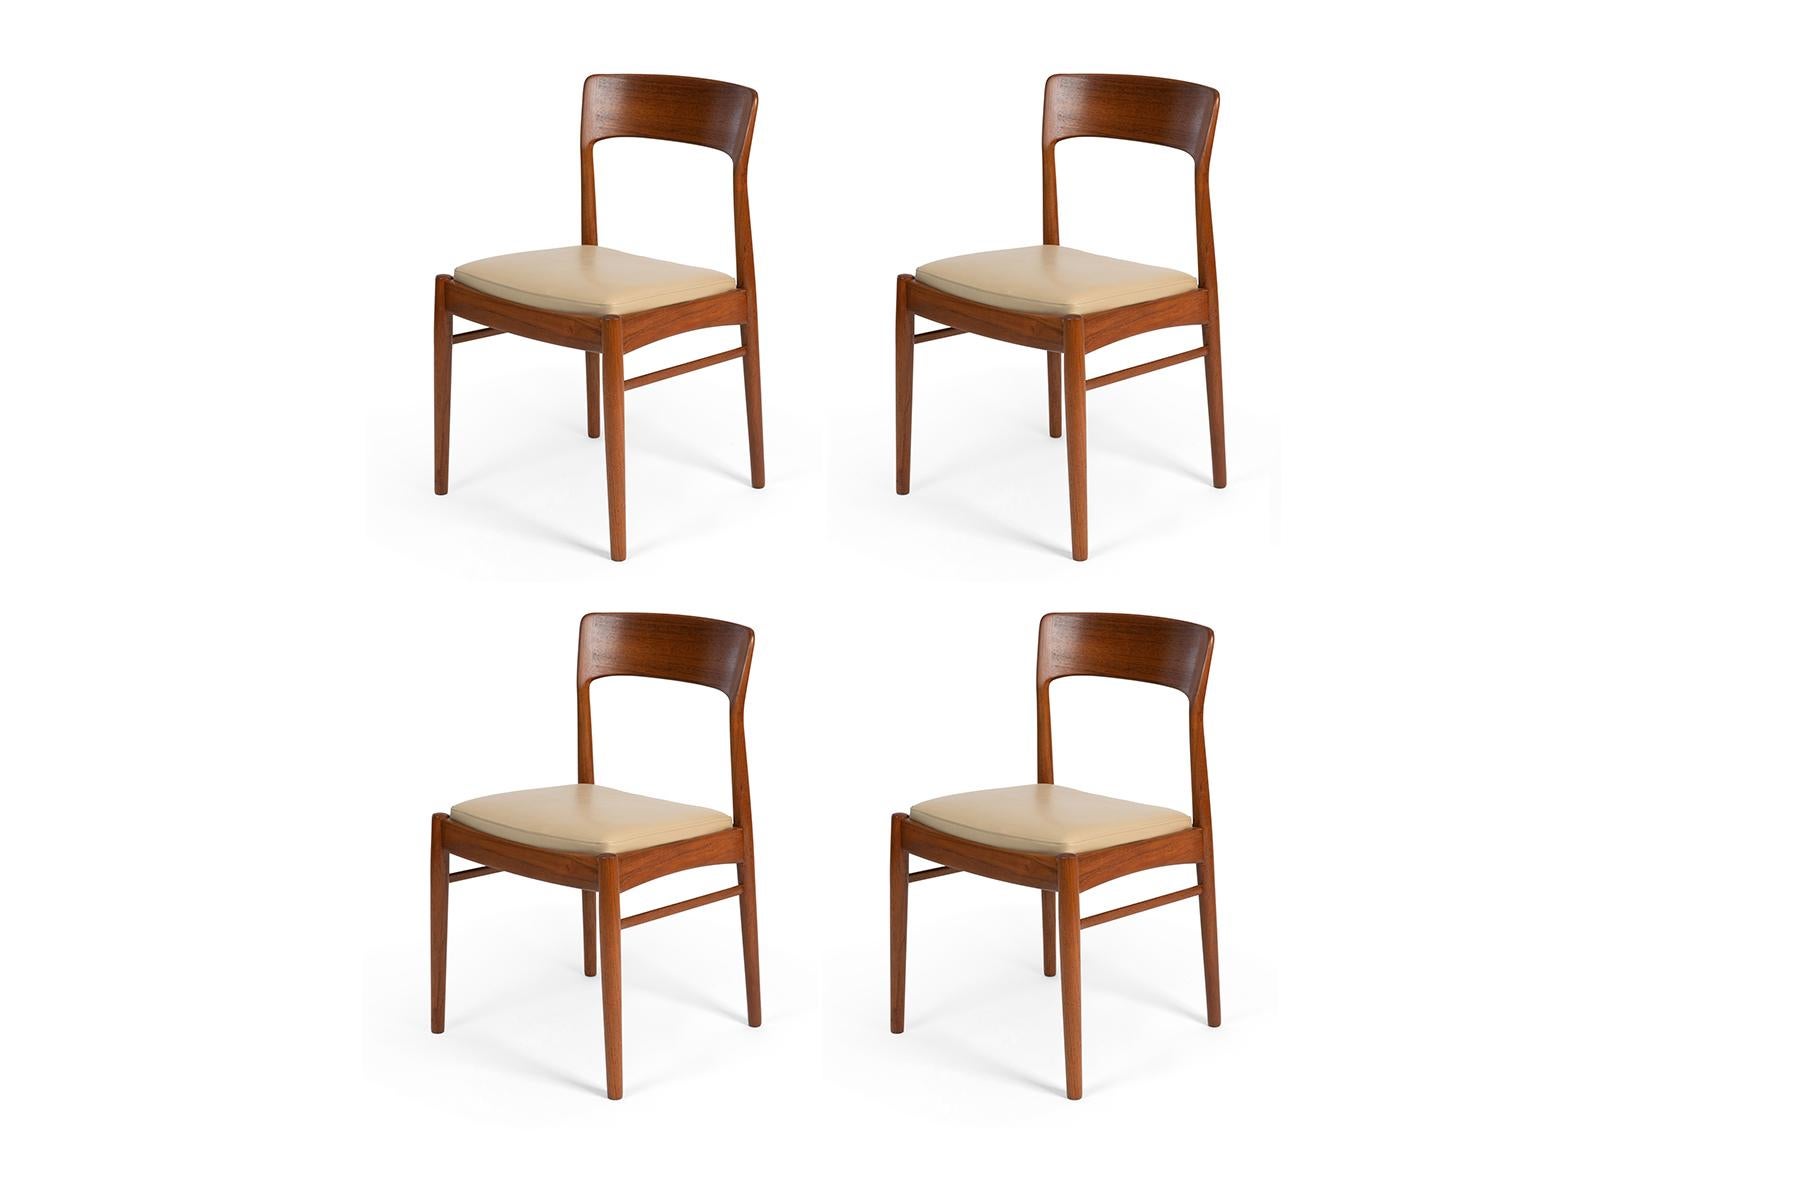 Set of 4 Kai Kristiansen mid-century teak dining chairs, expertly refinished and newly upholstered in cream Spinneybeck leather.